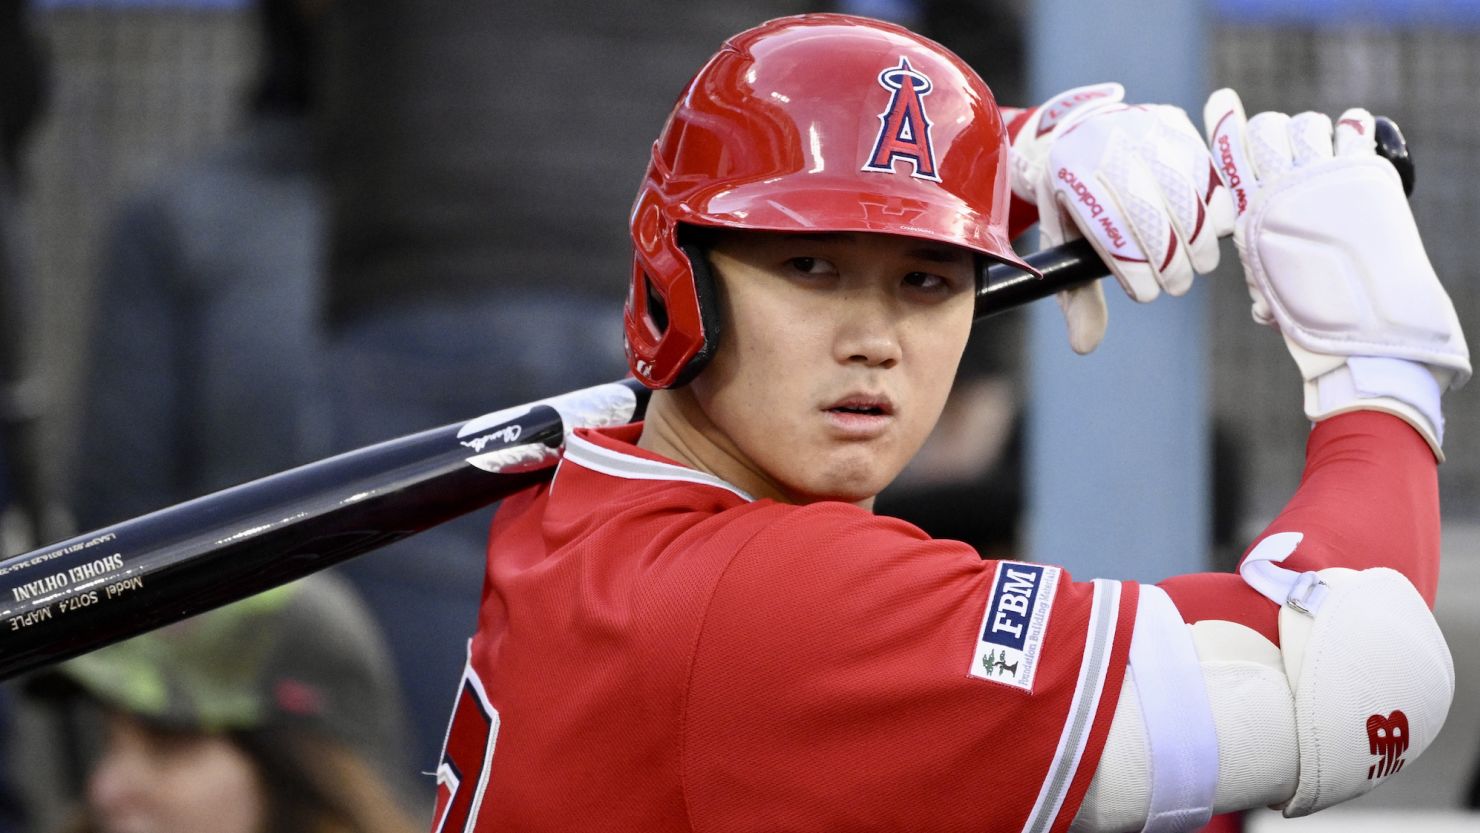 Shohei Ohtani is to become the MLB's all-time highest earner in 2023.